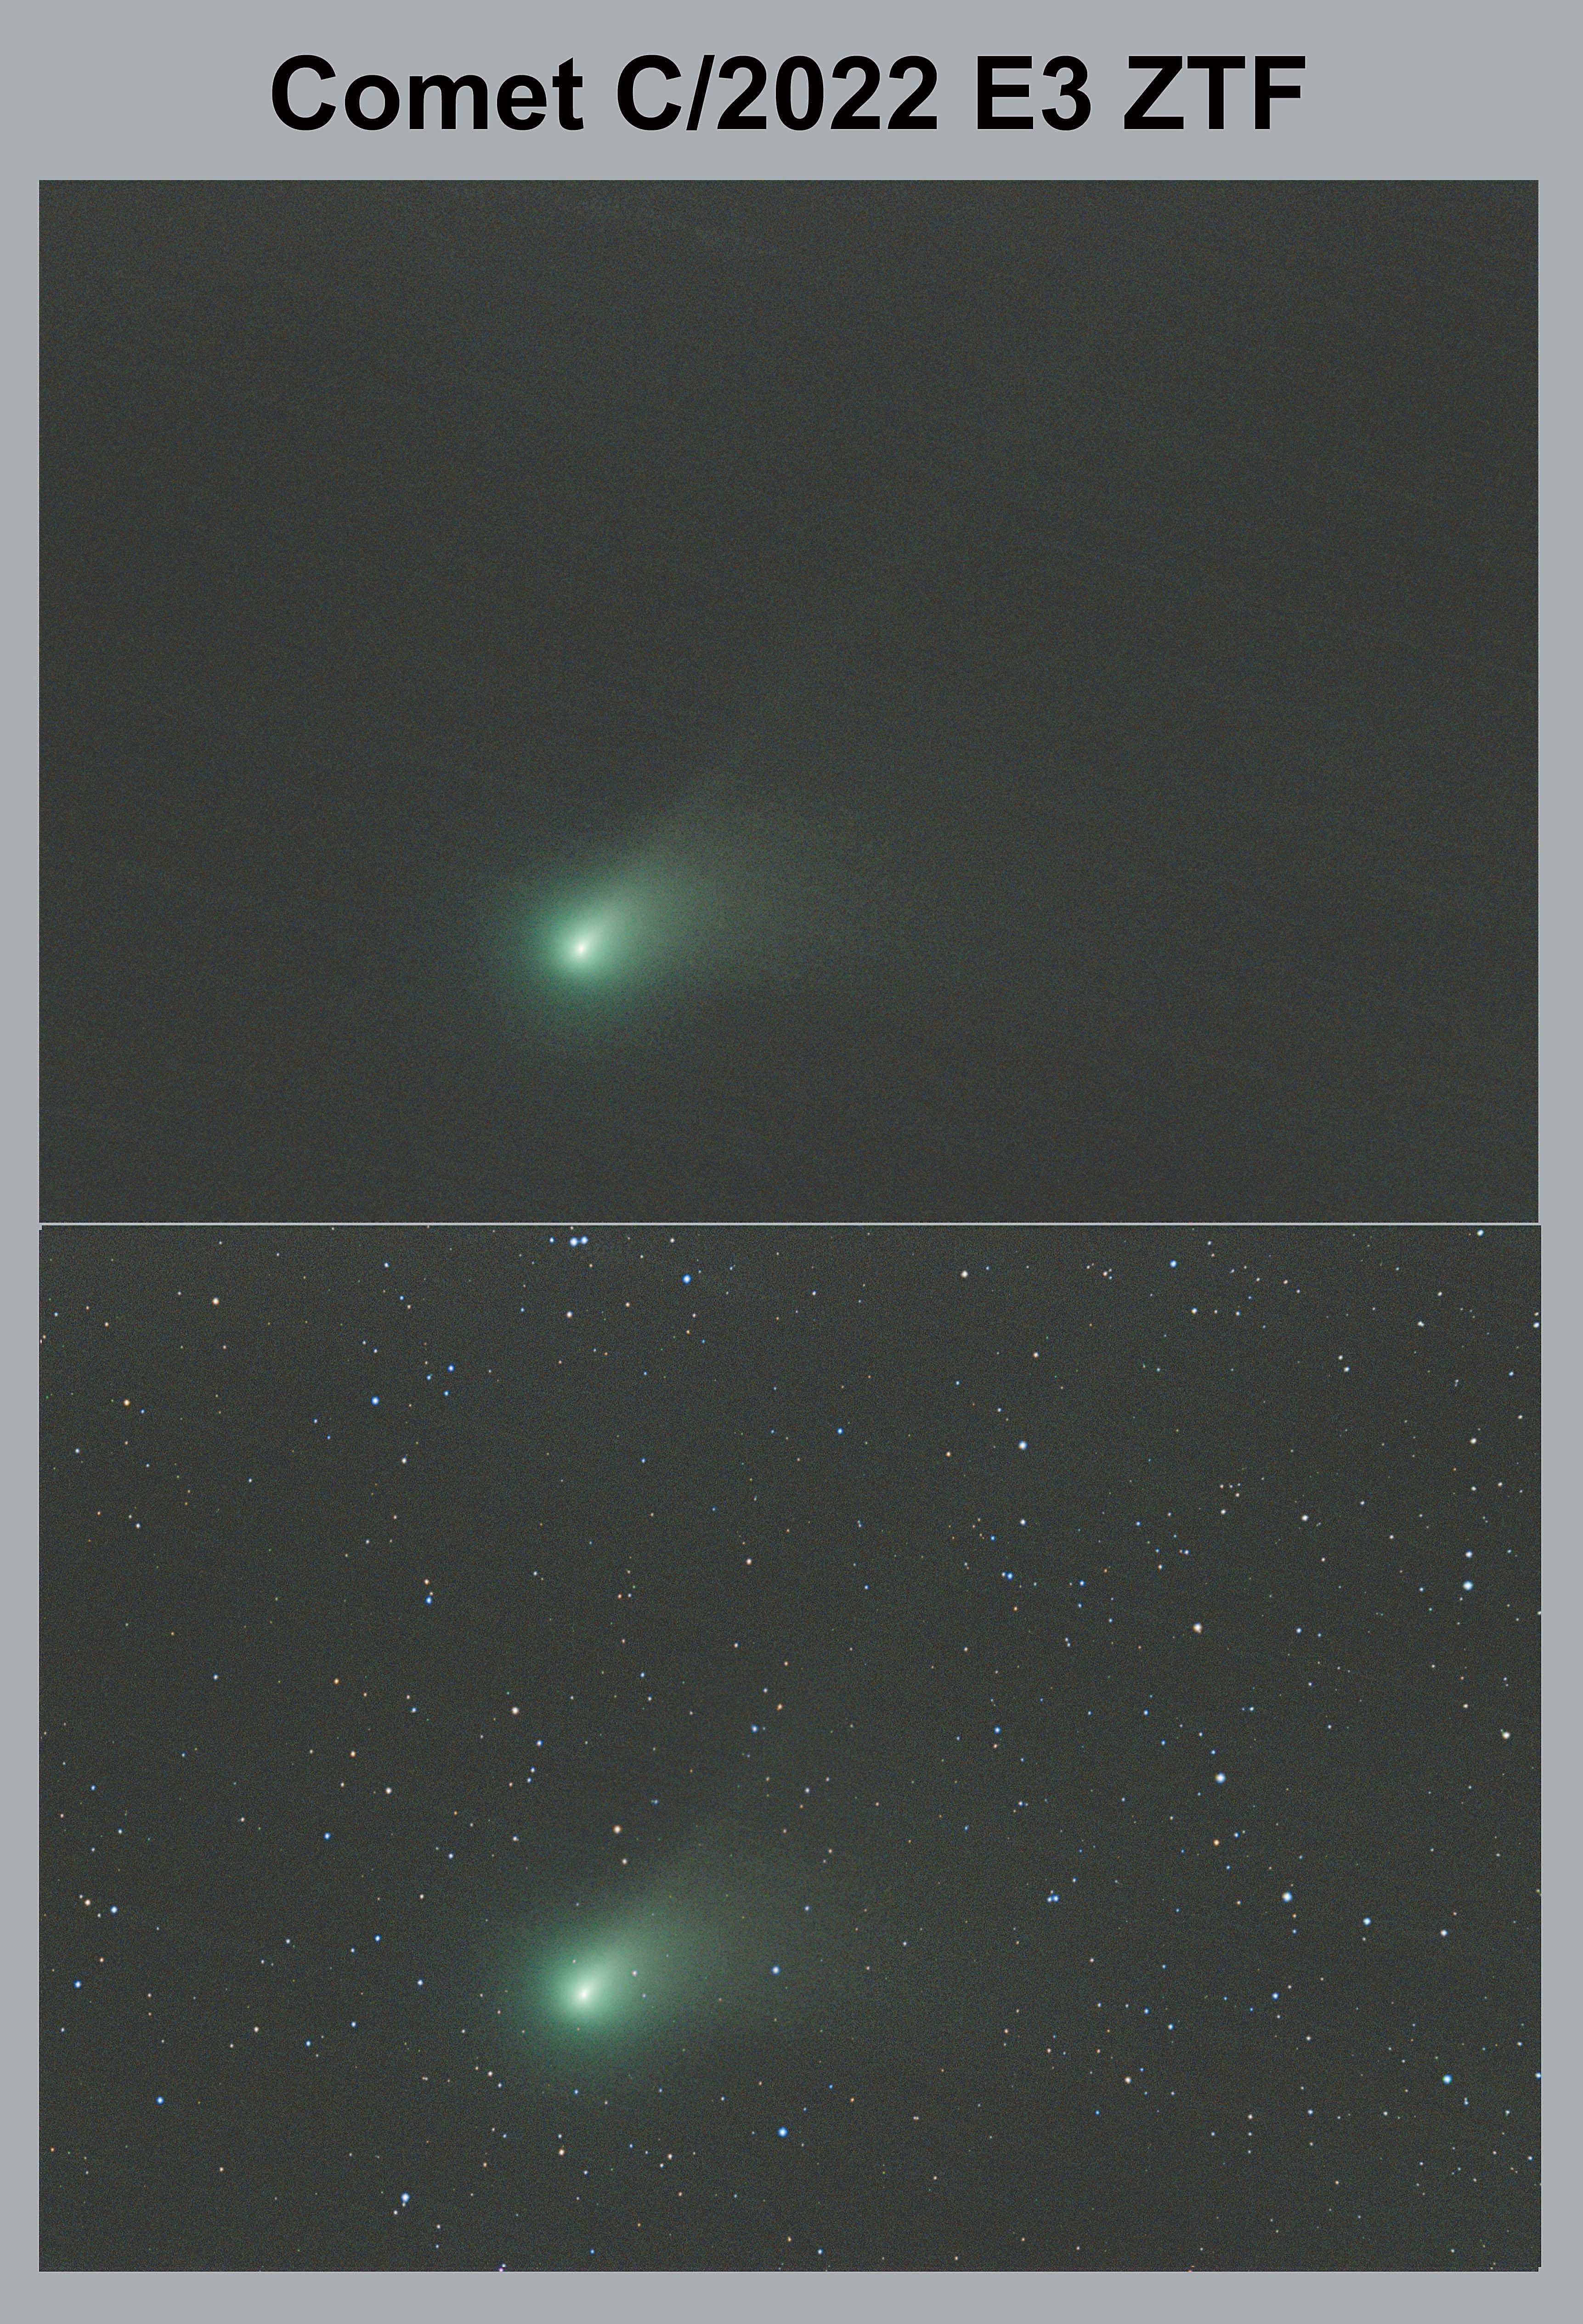 Comet starfield and comet only